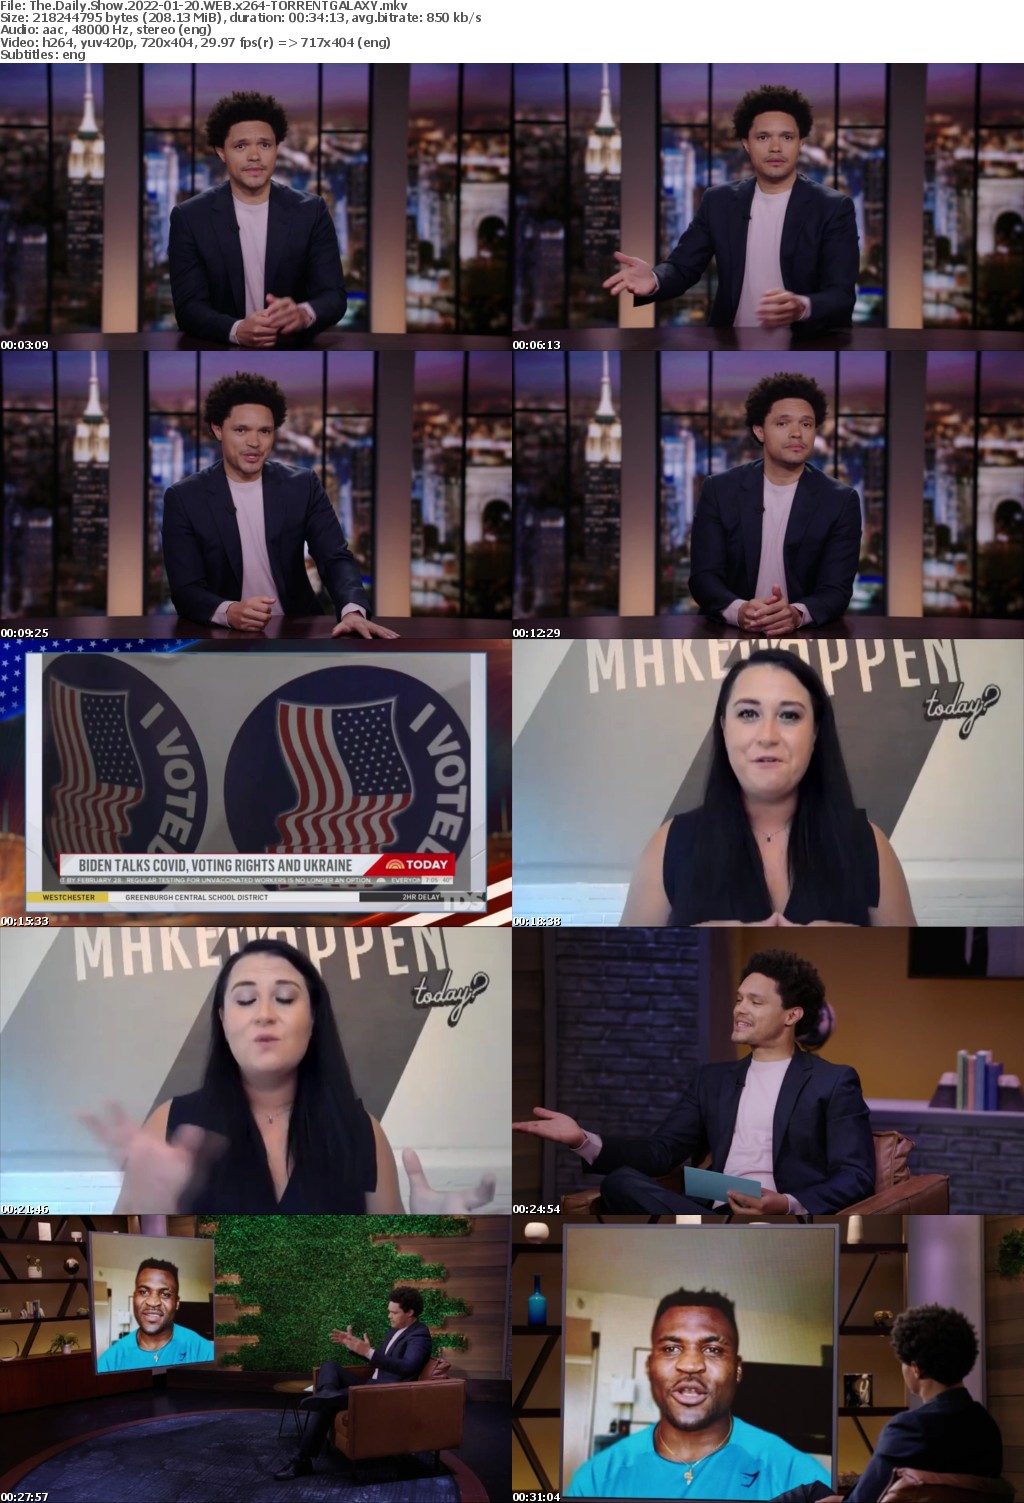 The Daily Show 2022-01-20 WEB x264-GALAXY